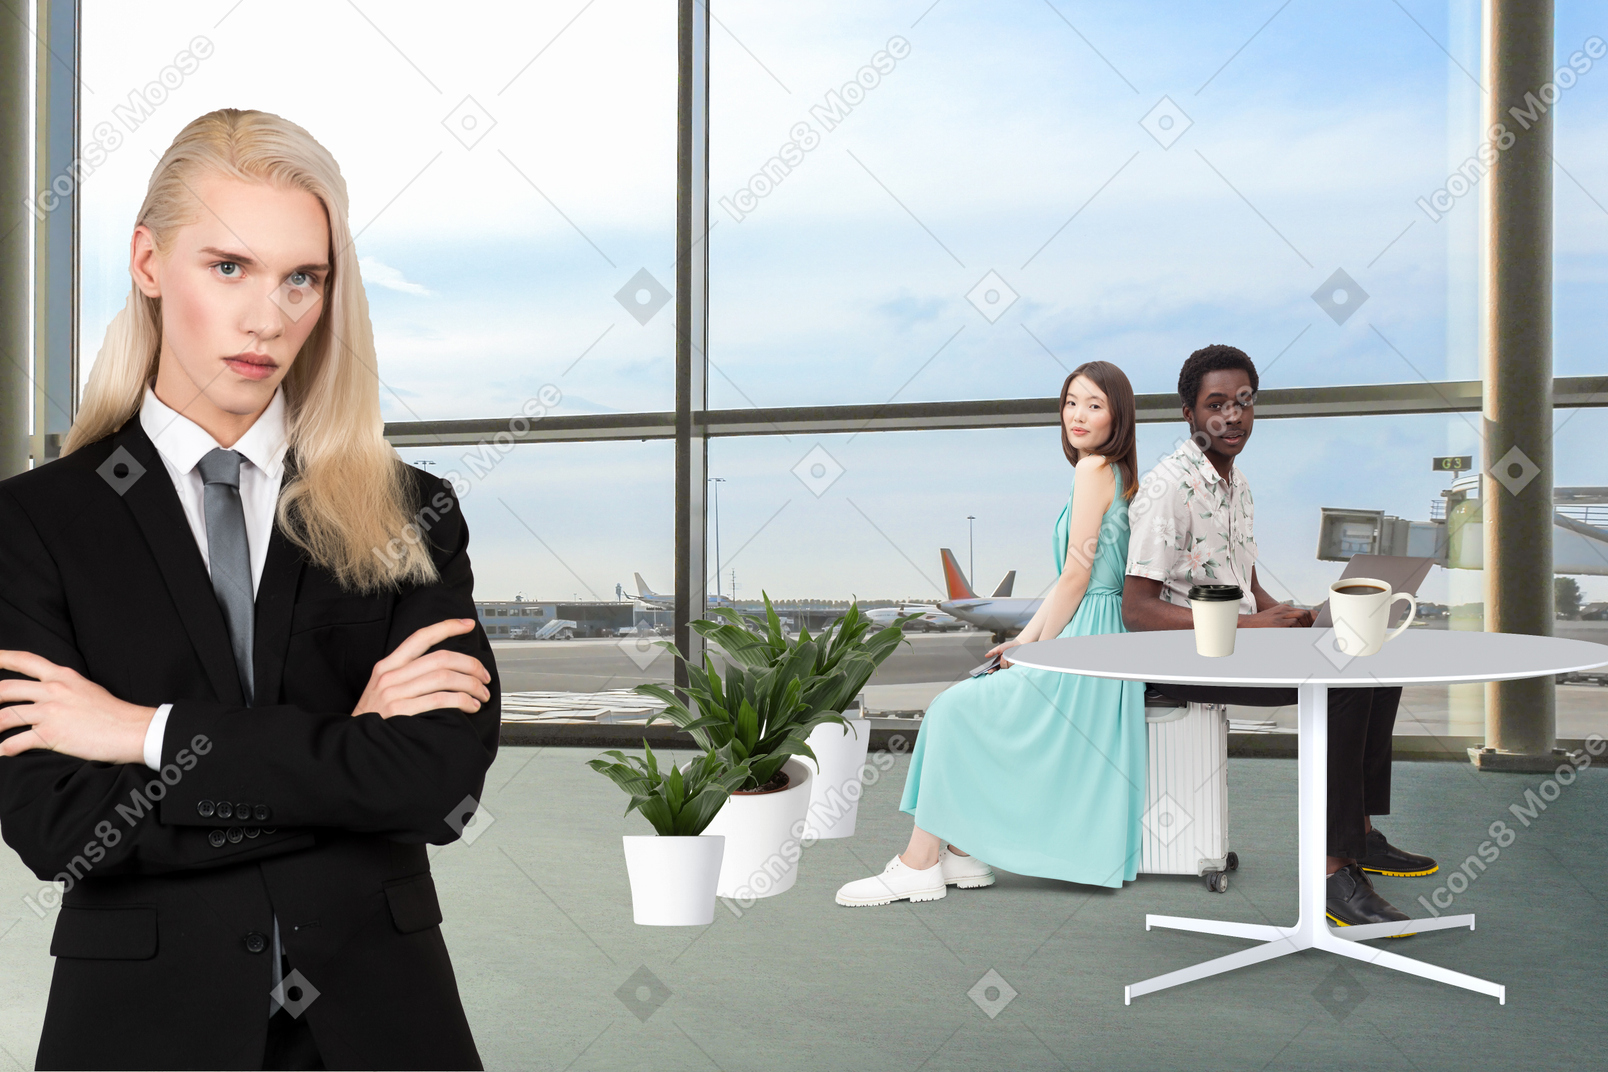 A person in a business suit standing in front of a group of people